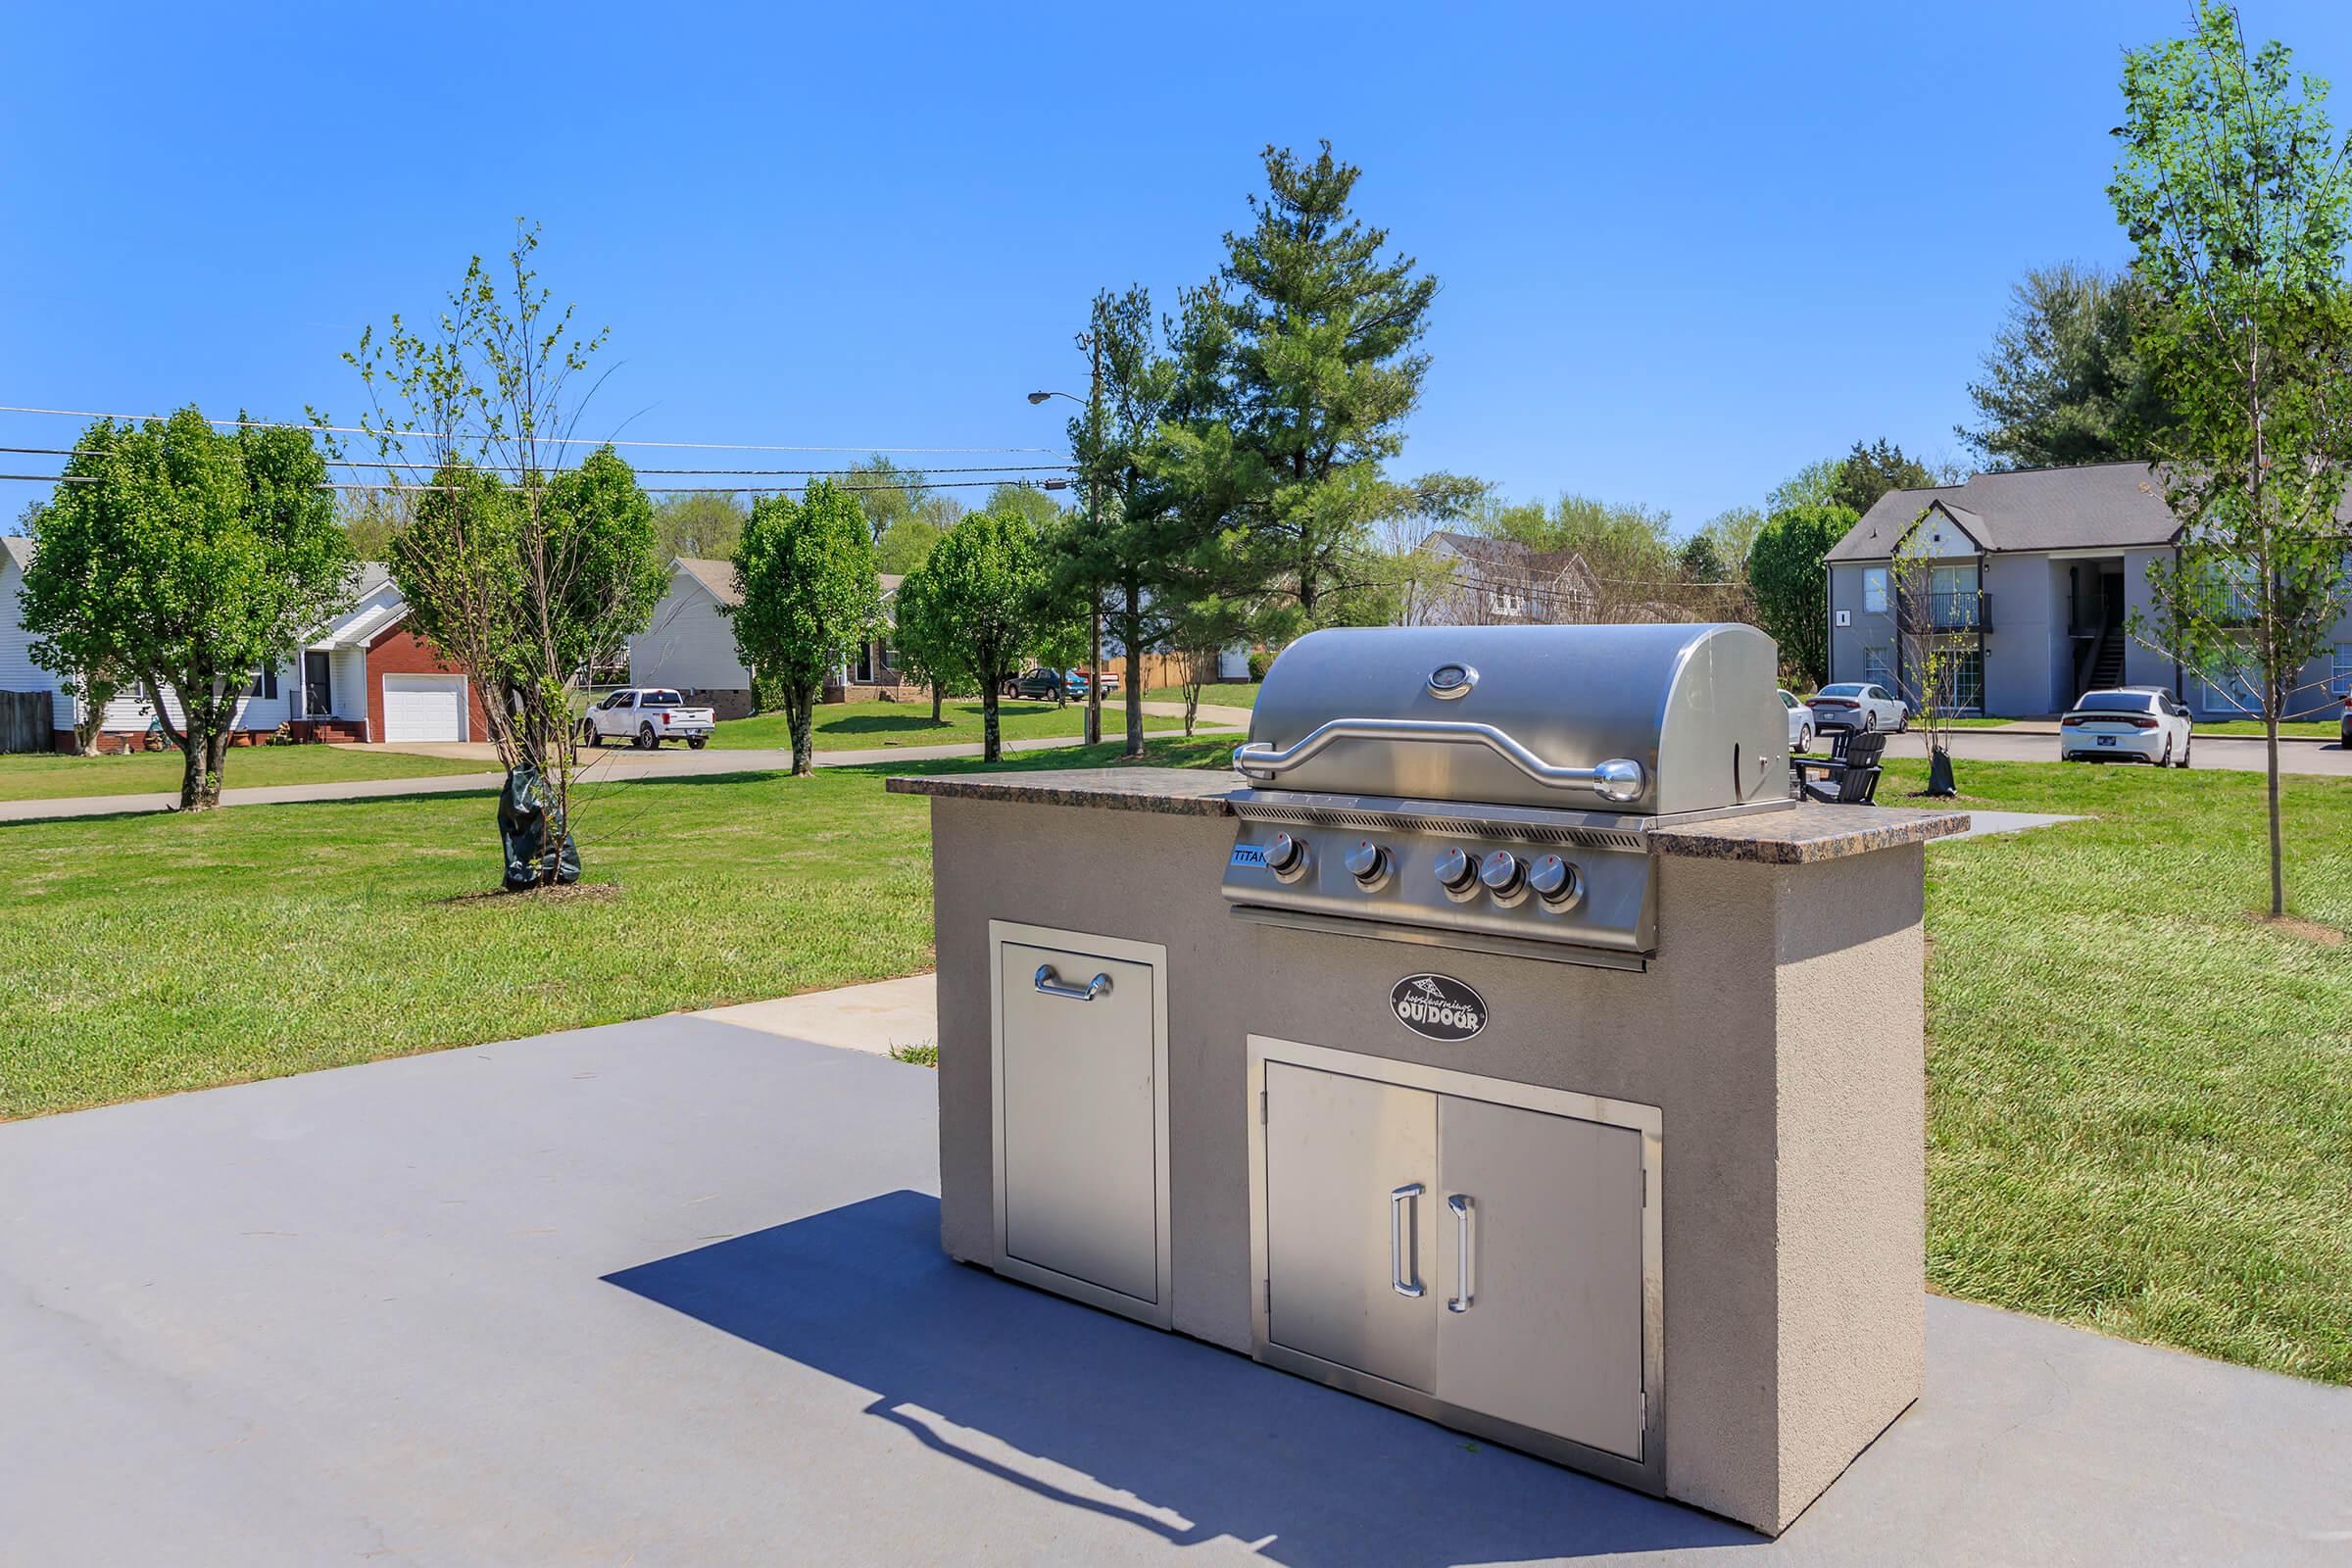 GREAT GRILLS FOR YOUR NEXT BARBECUE